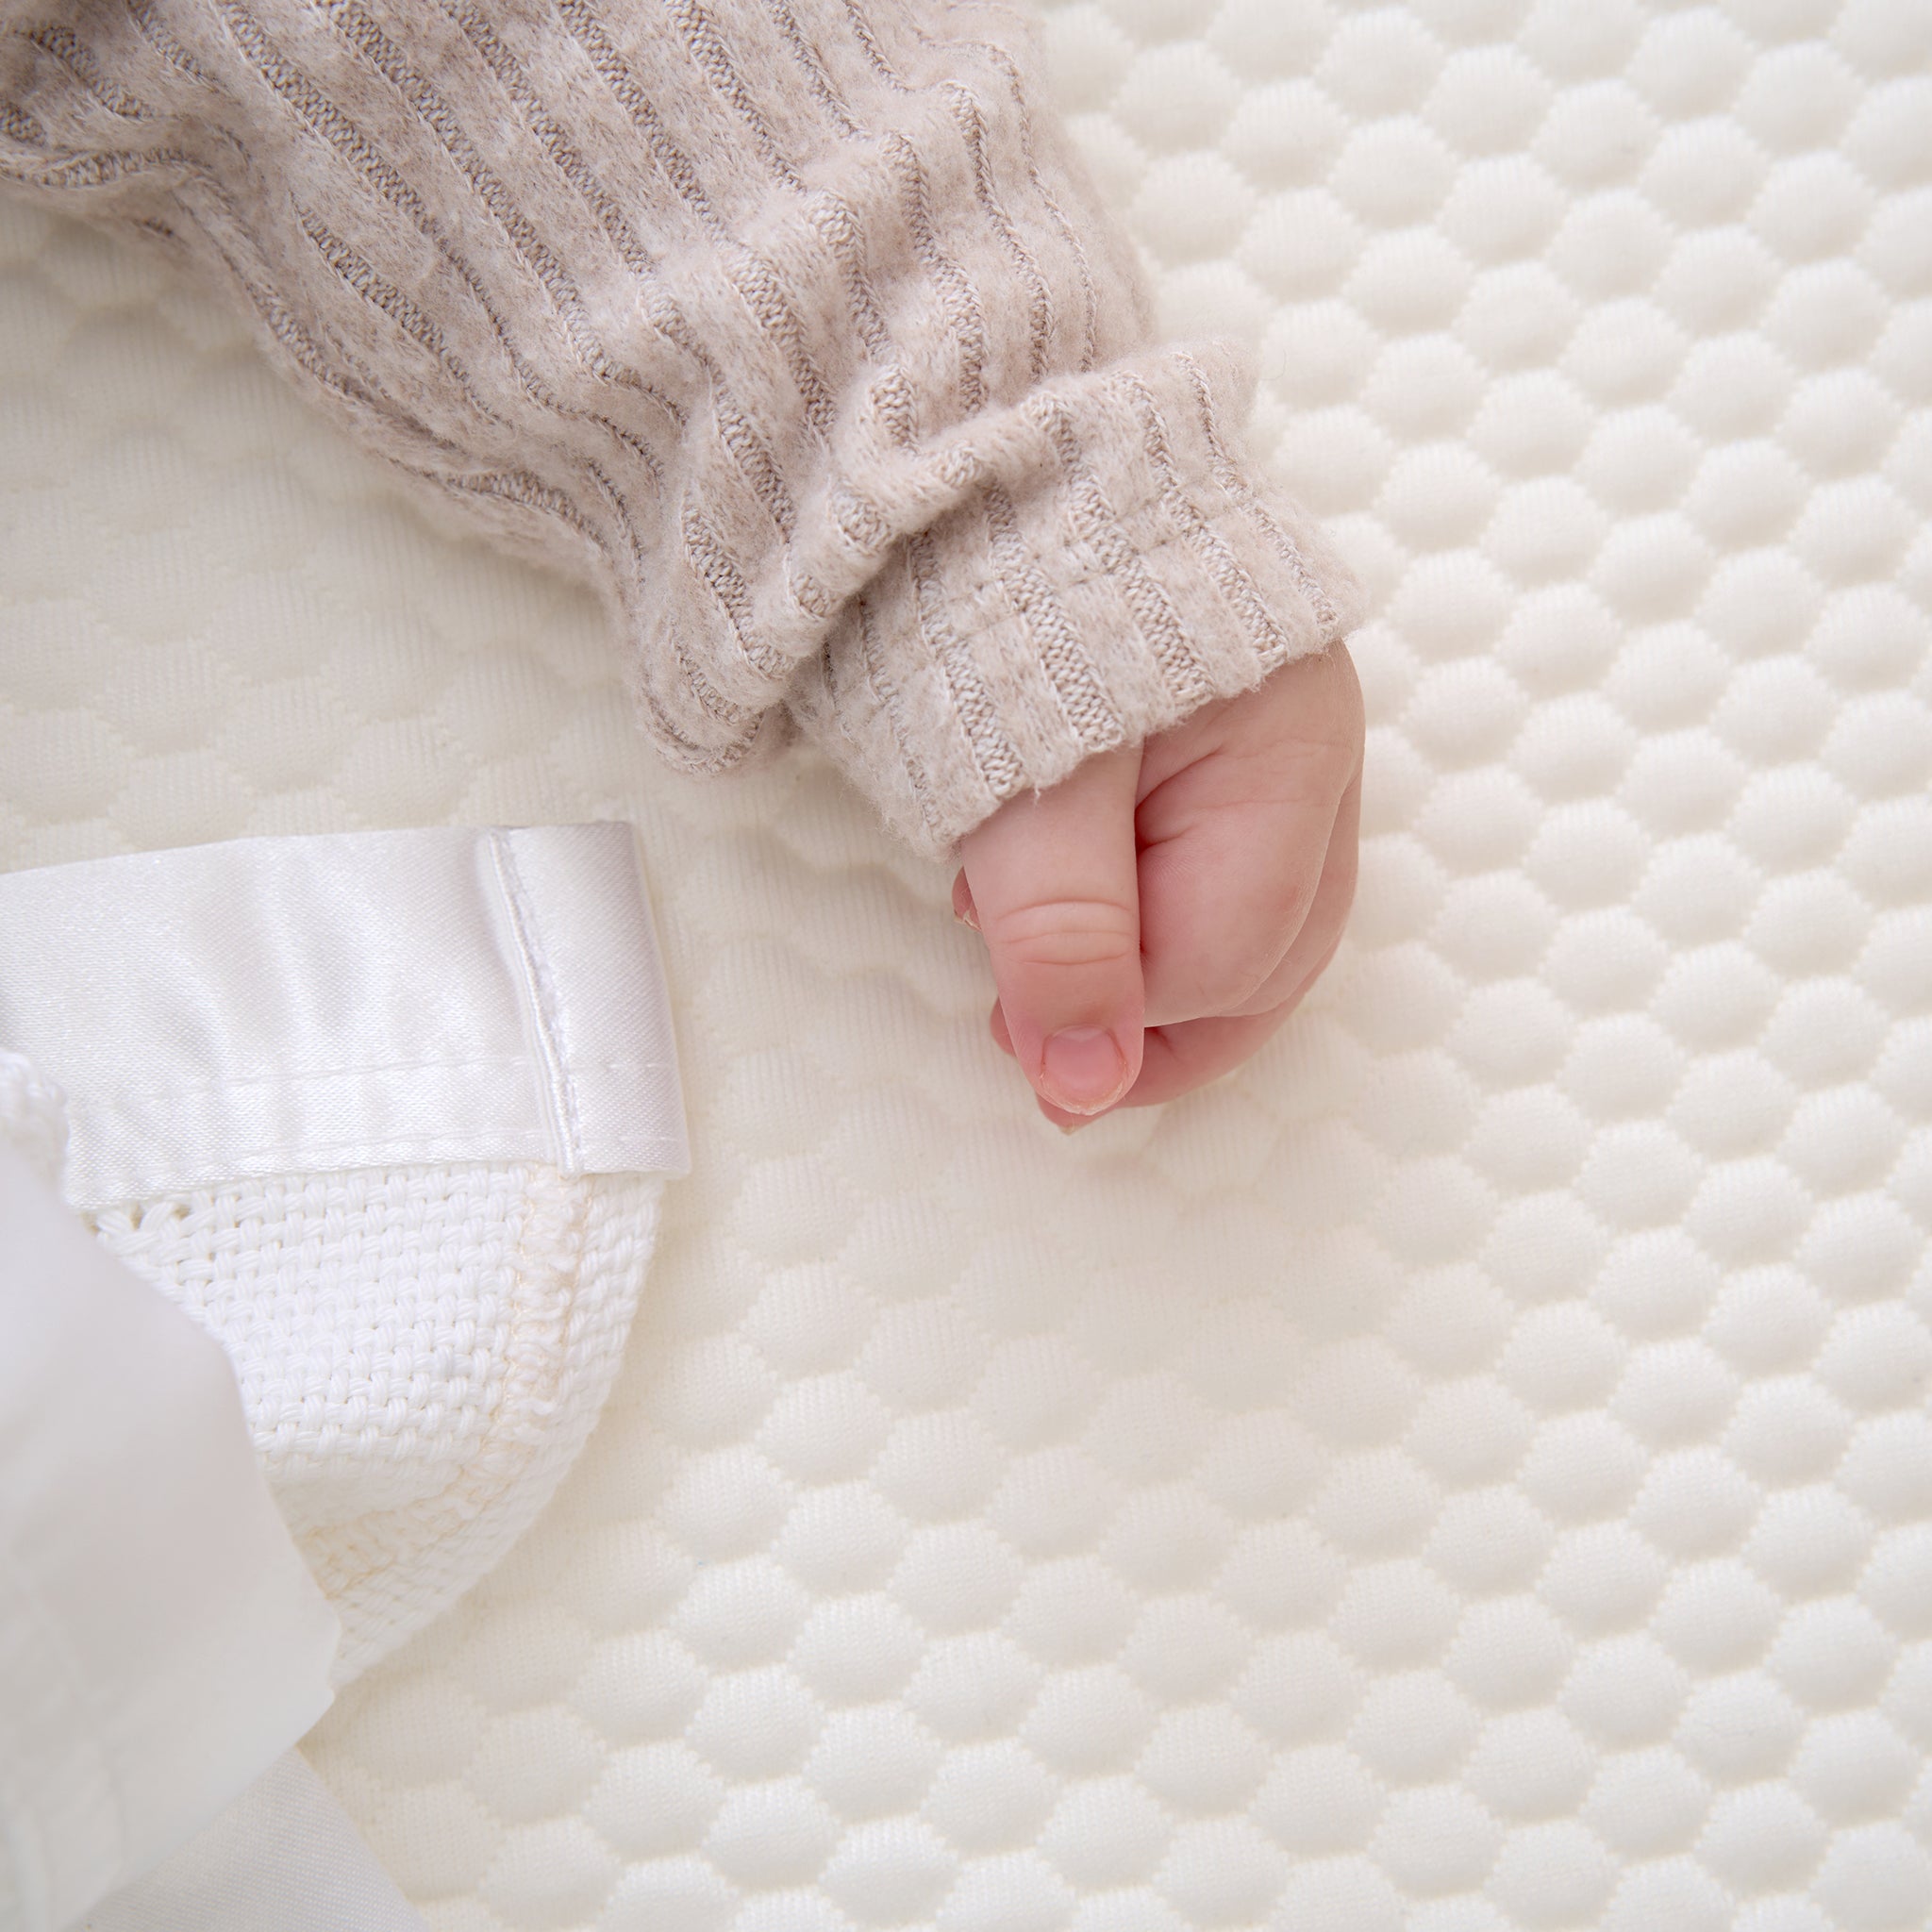 Tiny Dreamer Natural™ - Organic Coconut & 100% Wool Foldable Travel Cot Mattress To Fit Maxi-Cosi Iris 91 x 52cm - The Tiny Bed Company™